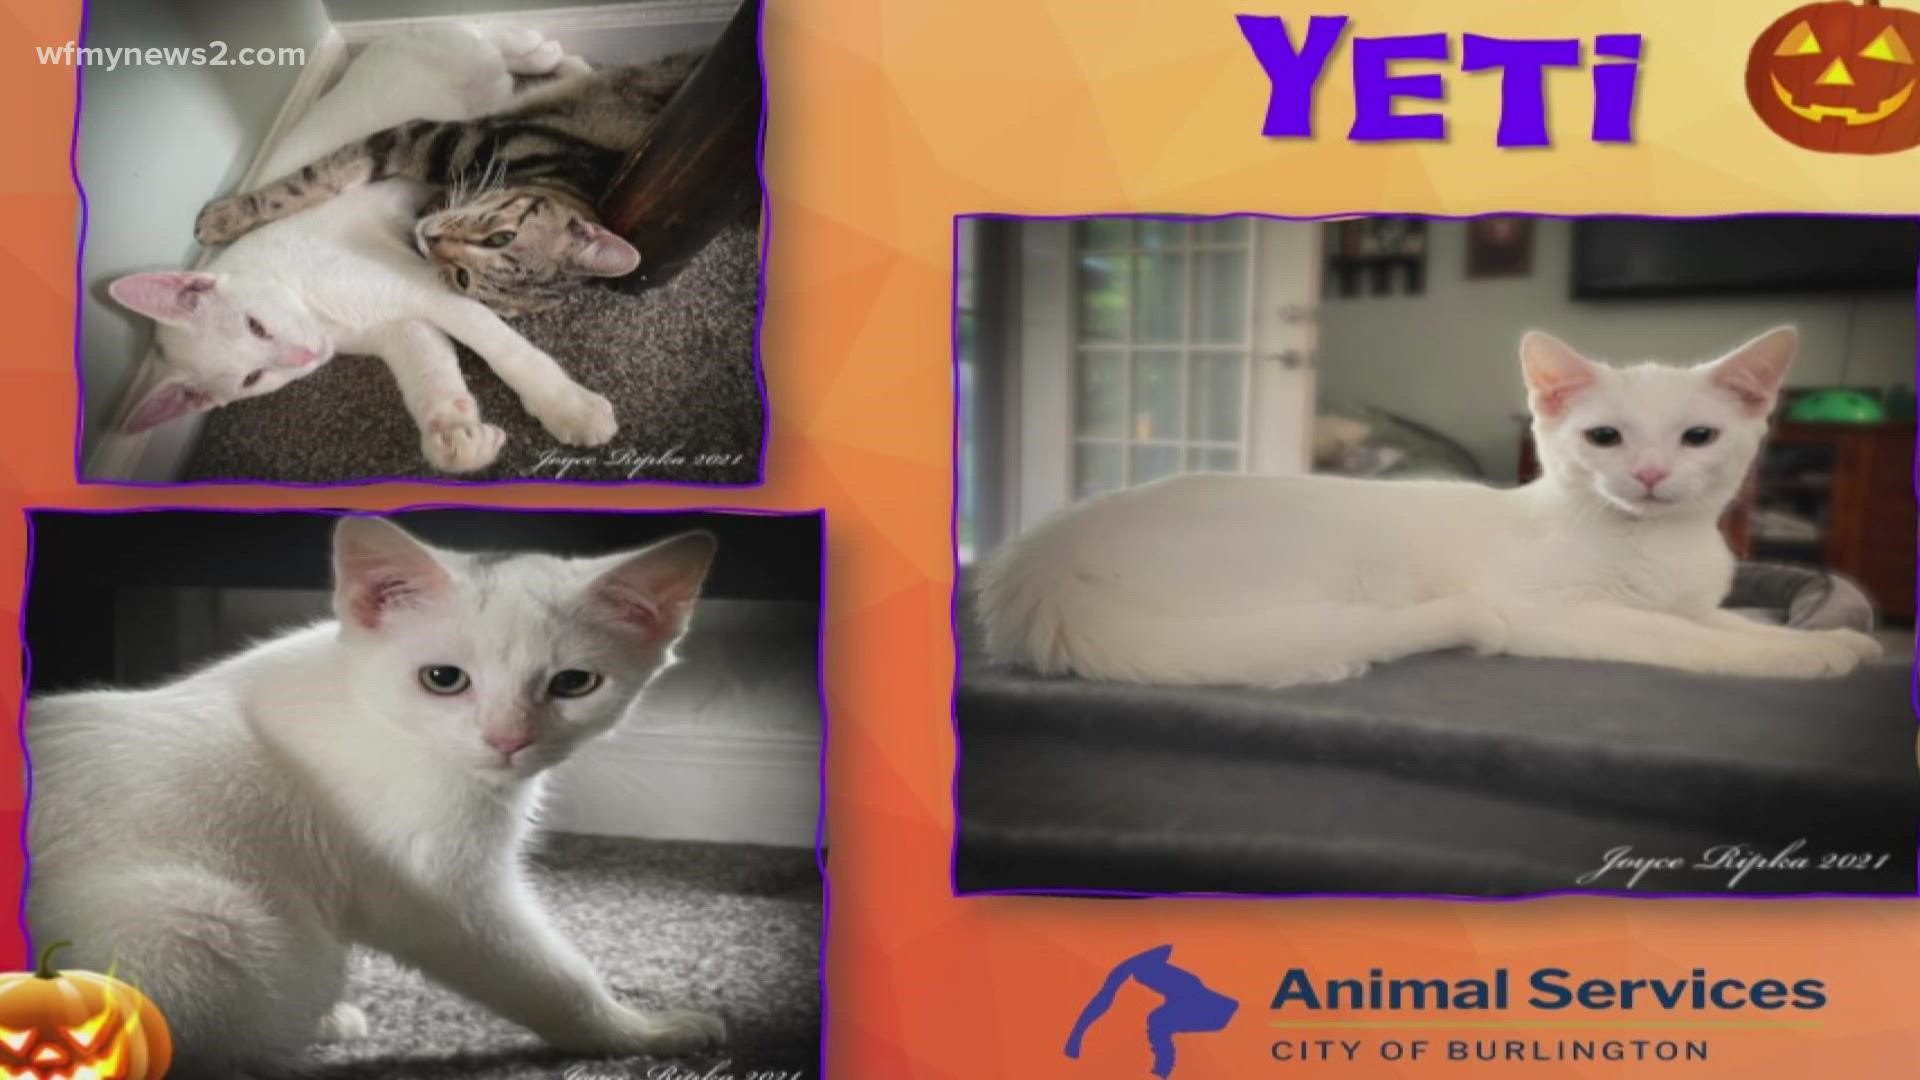 Let's get Yeti adopted!